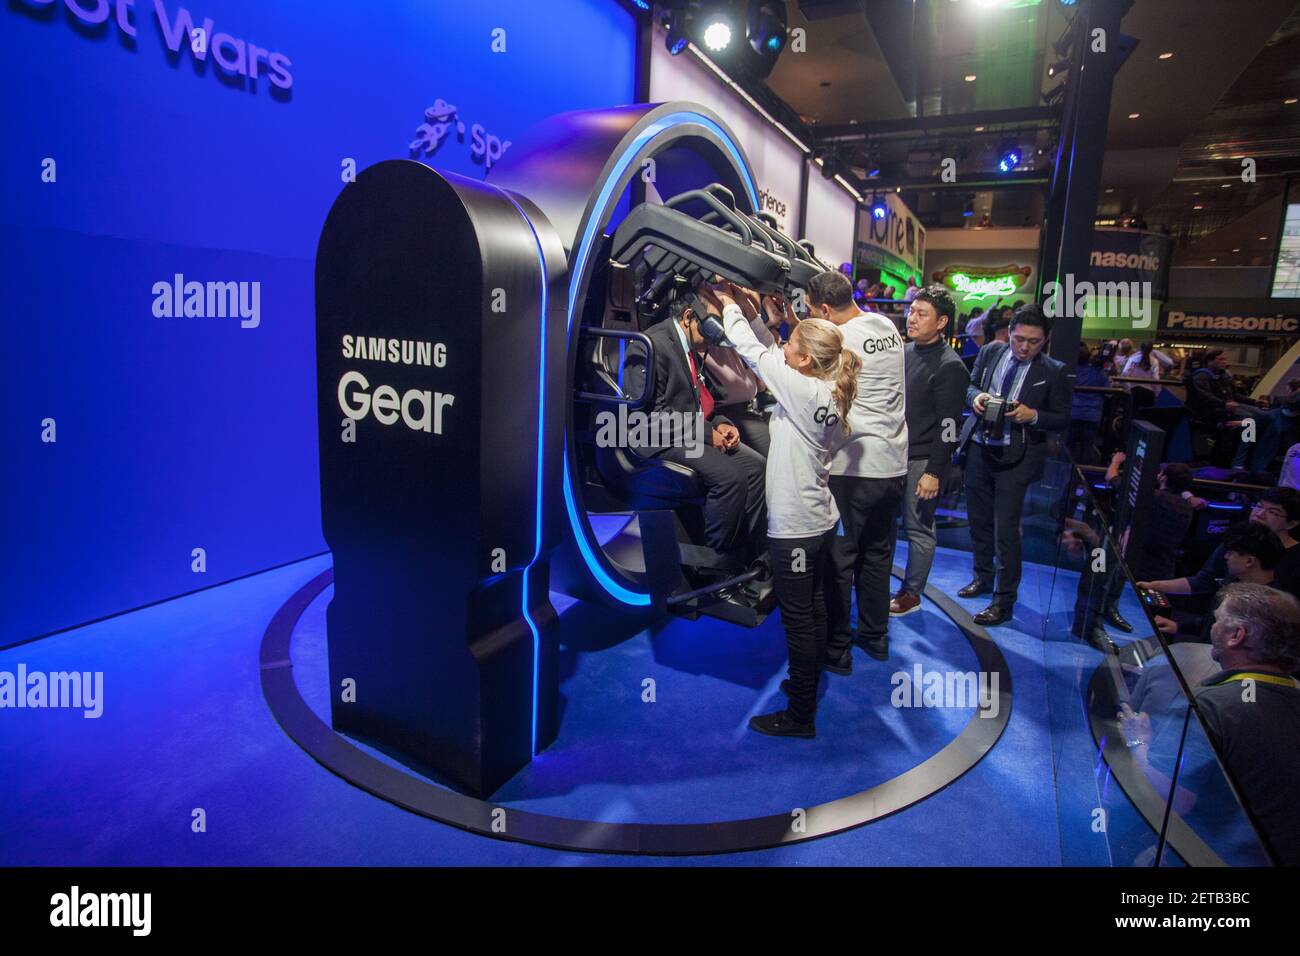 People Riding Samsung 4d Gear VR Experience at the Samsung Booth at the  Consumer Electronics Show held in Las Vegas, Nevada on January 5, 2016.  (Photo by Mikey McNulty) *** Please Use